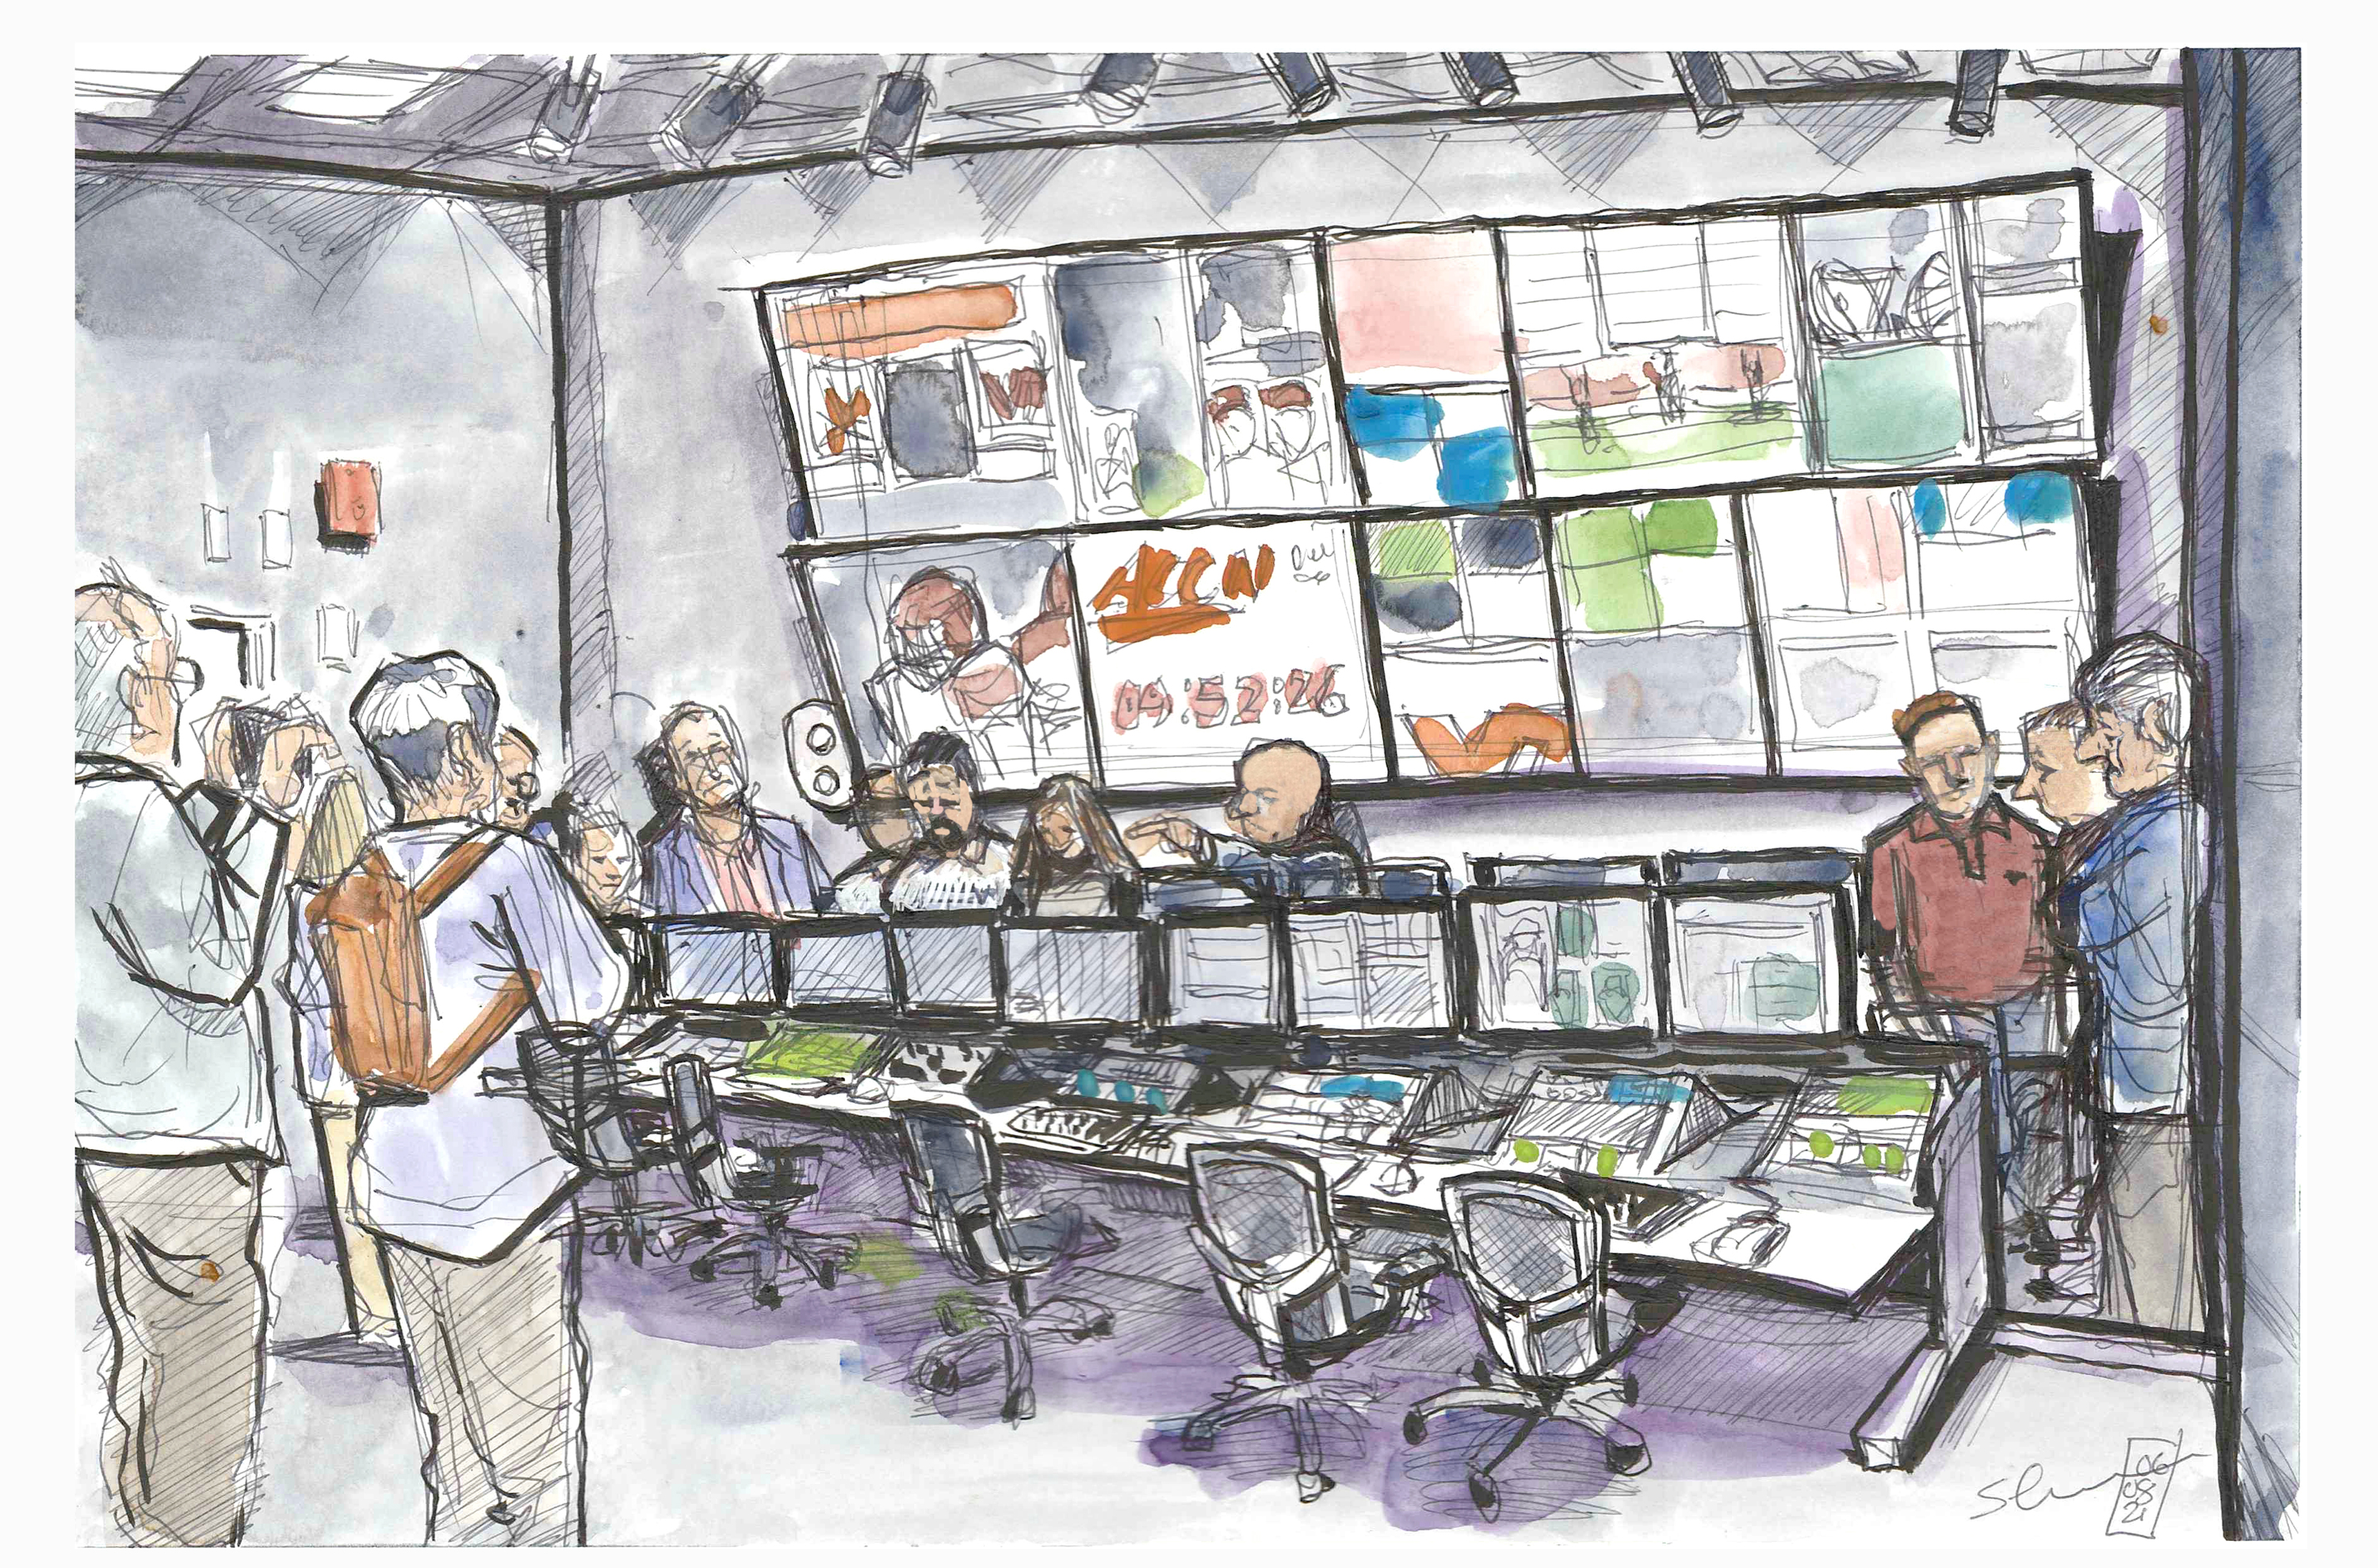 Illustration in ink and watercolor of a group of people visiting a room full of monitors and editing equipment